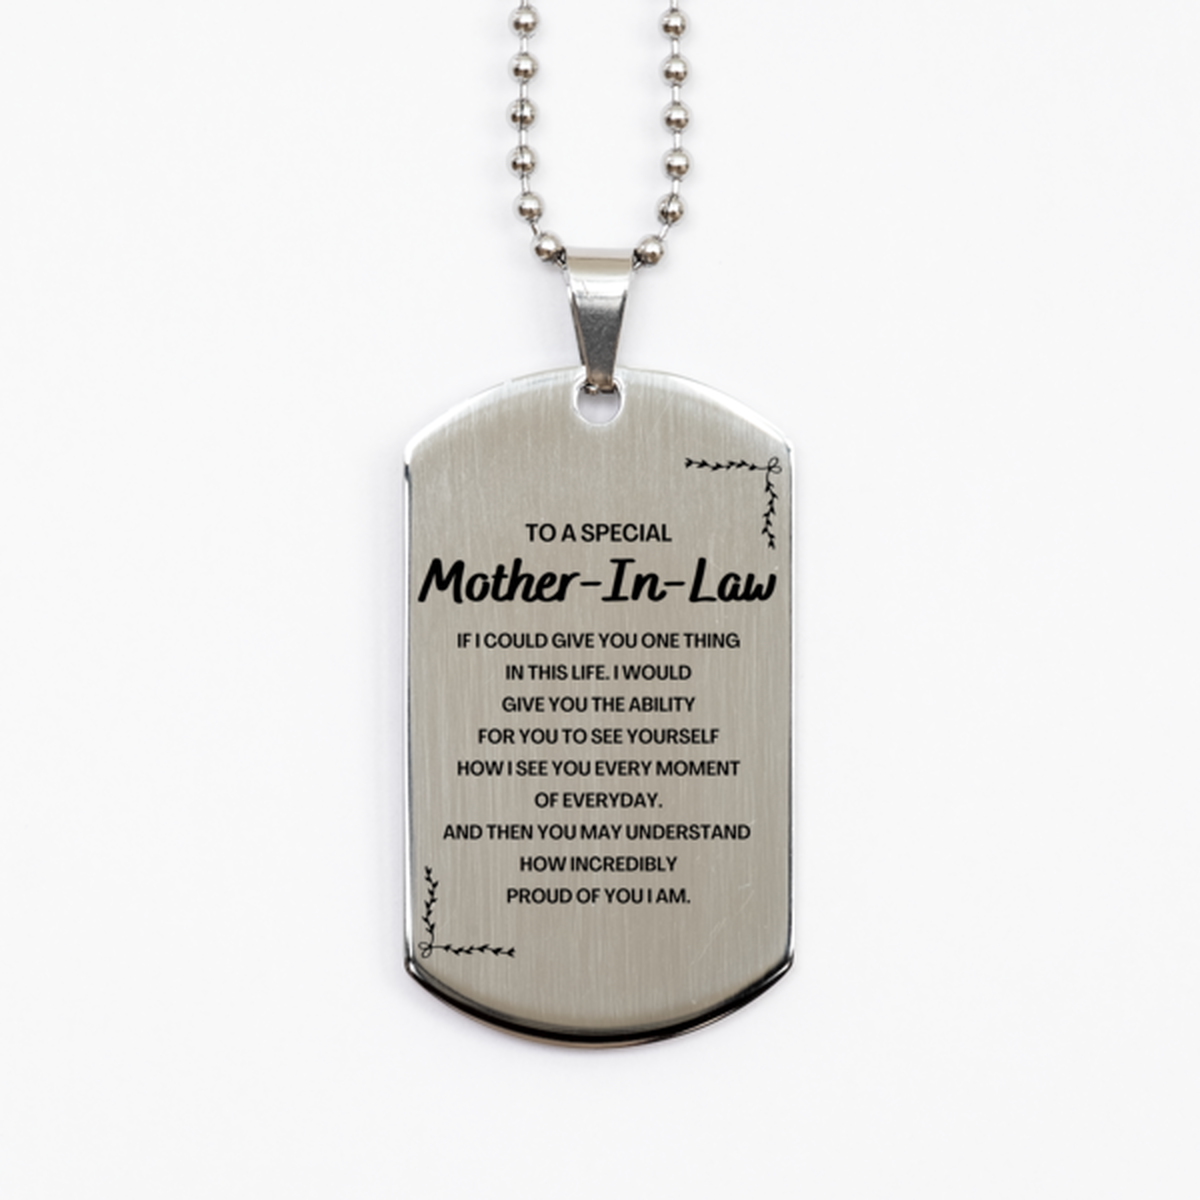 To My Mother-In-Law Silver Dog Tag, Gifts For Mother-In-Law Engraved, Inspirational Gifts for Christmas Birthday, Epic Gifts for Mother-In-Law To A Special Mother-In-Law how incredibly proud of you I am